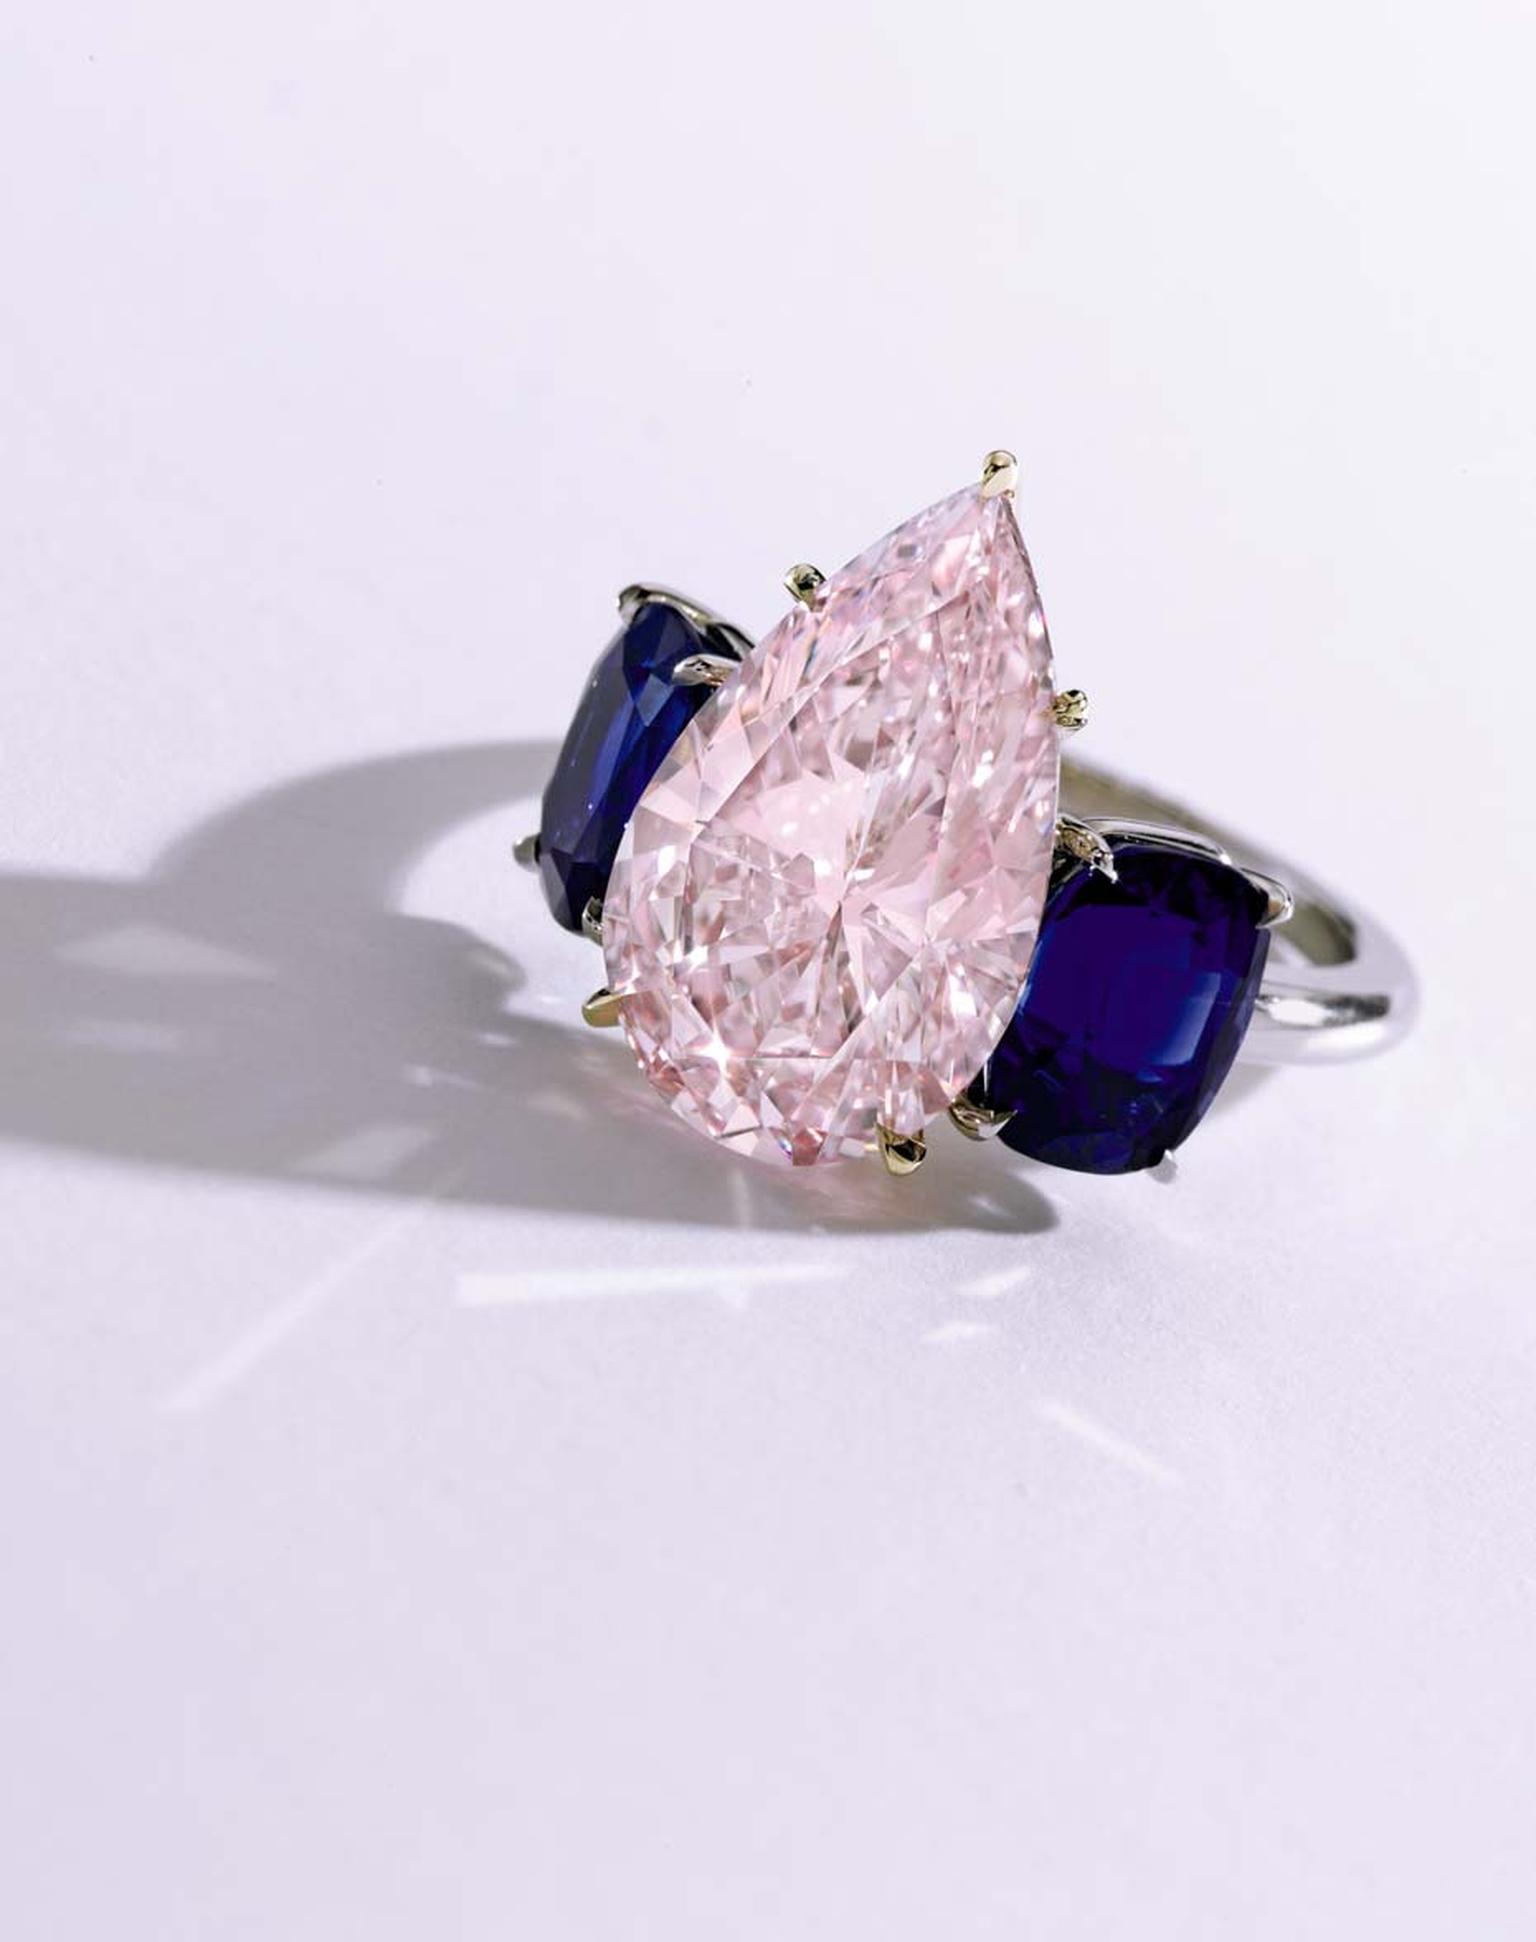 Pink diamond and sapphire ring set with an unmodified pear-shaped Fancy purplish pink 6.24ct diamond and two cushion-cut Kashmir sapphires in gold and platinum. It sold for $2.4 million at Sotheby's Auction of Magnificent Jewels on 21 April.